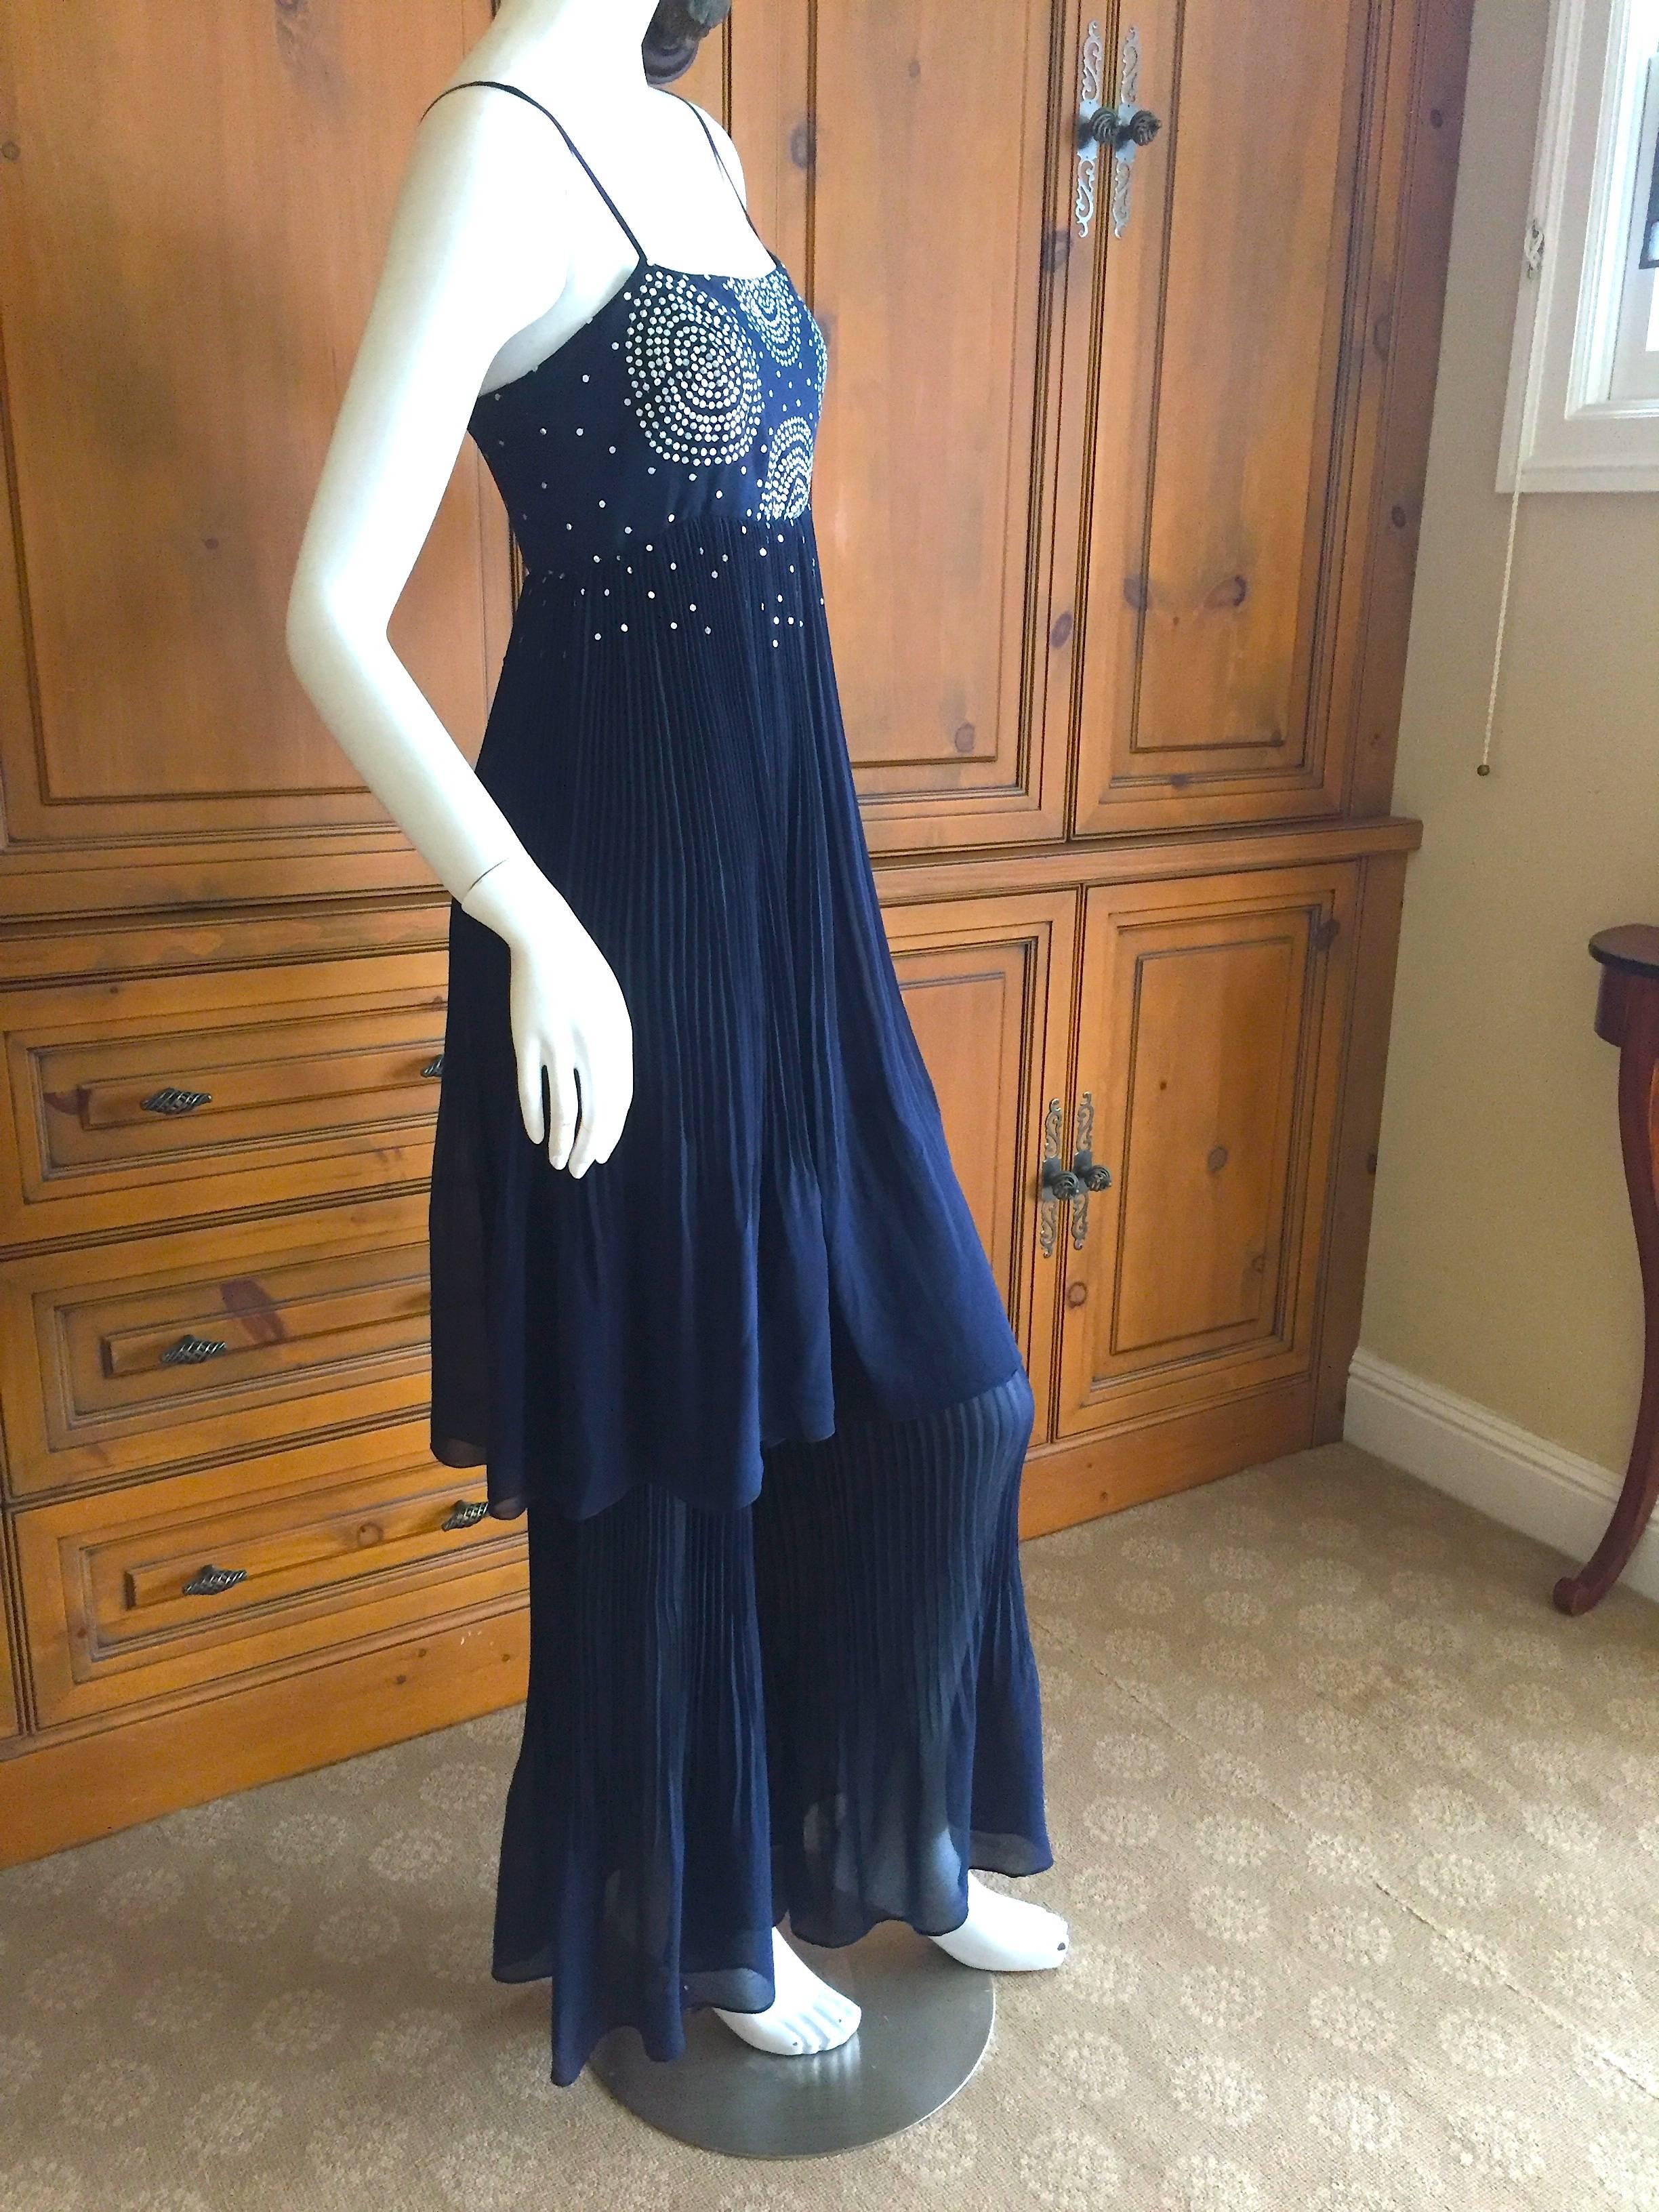 Black Chanel Navy Blue Dress with Silver Sequin Embellishment